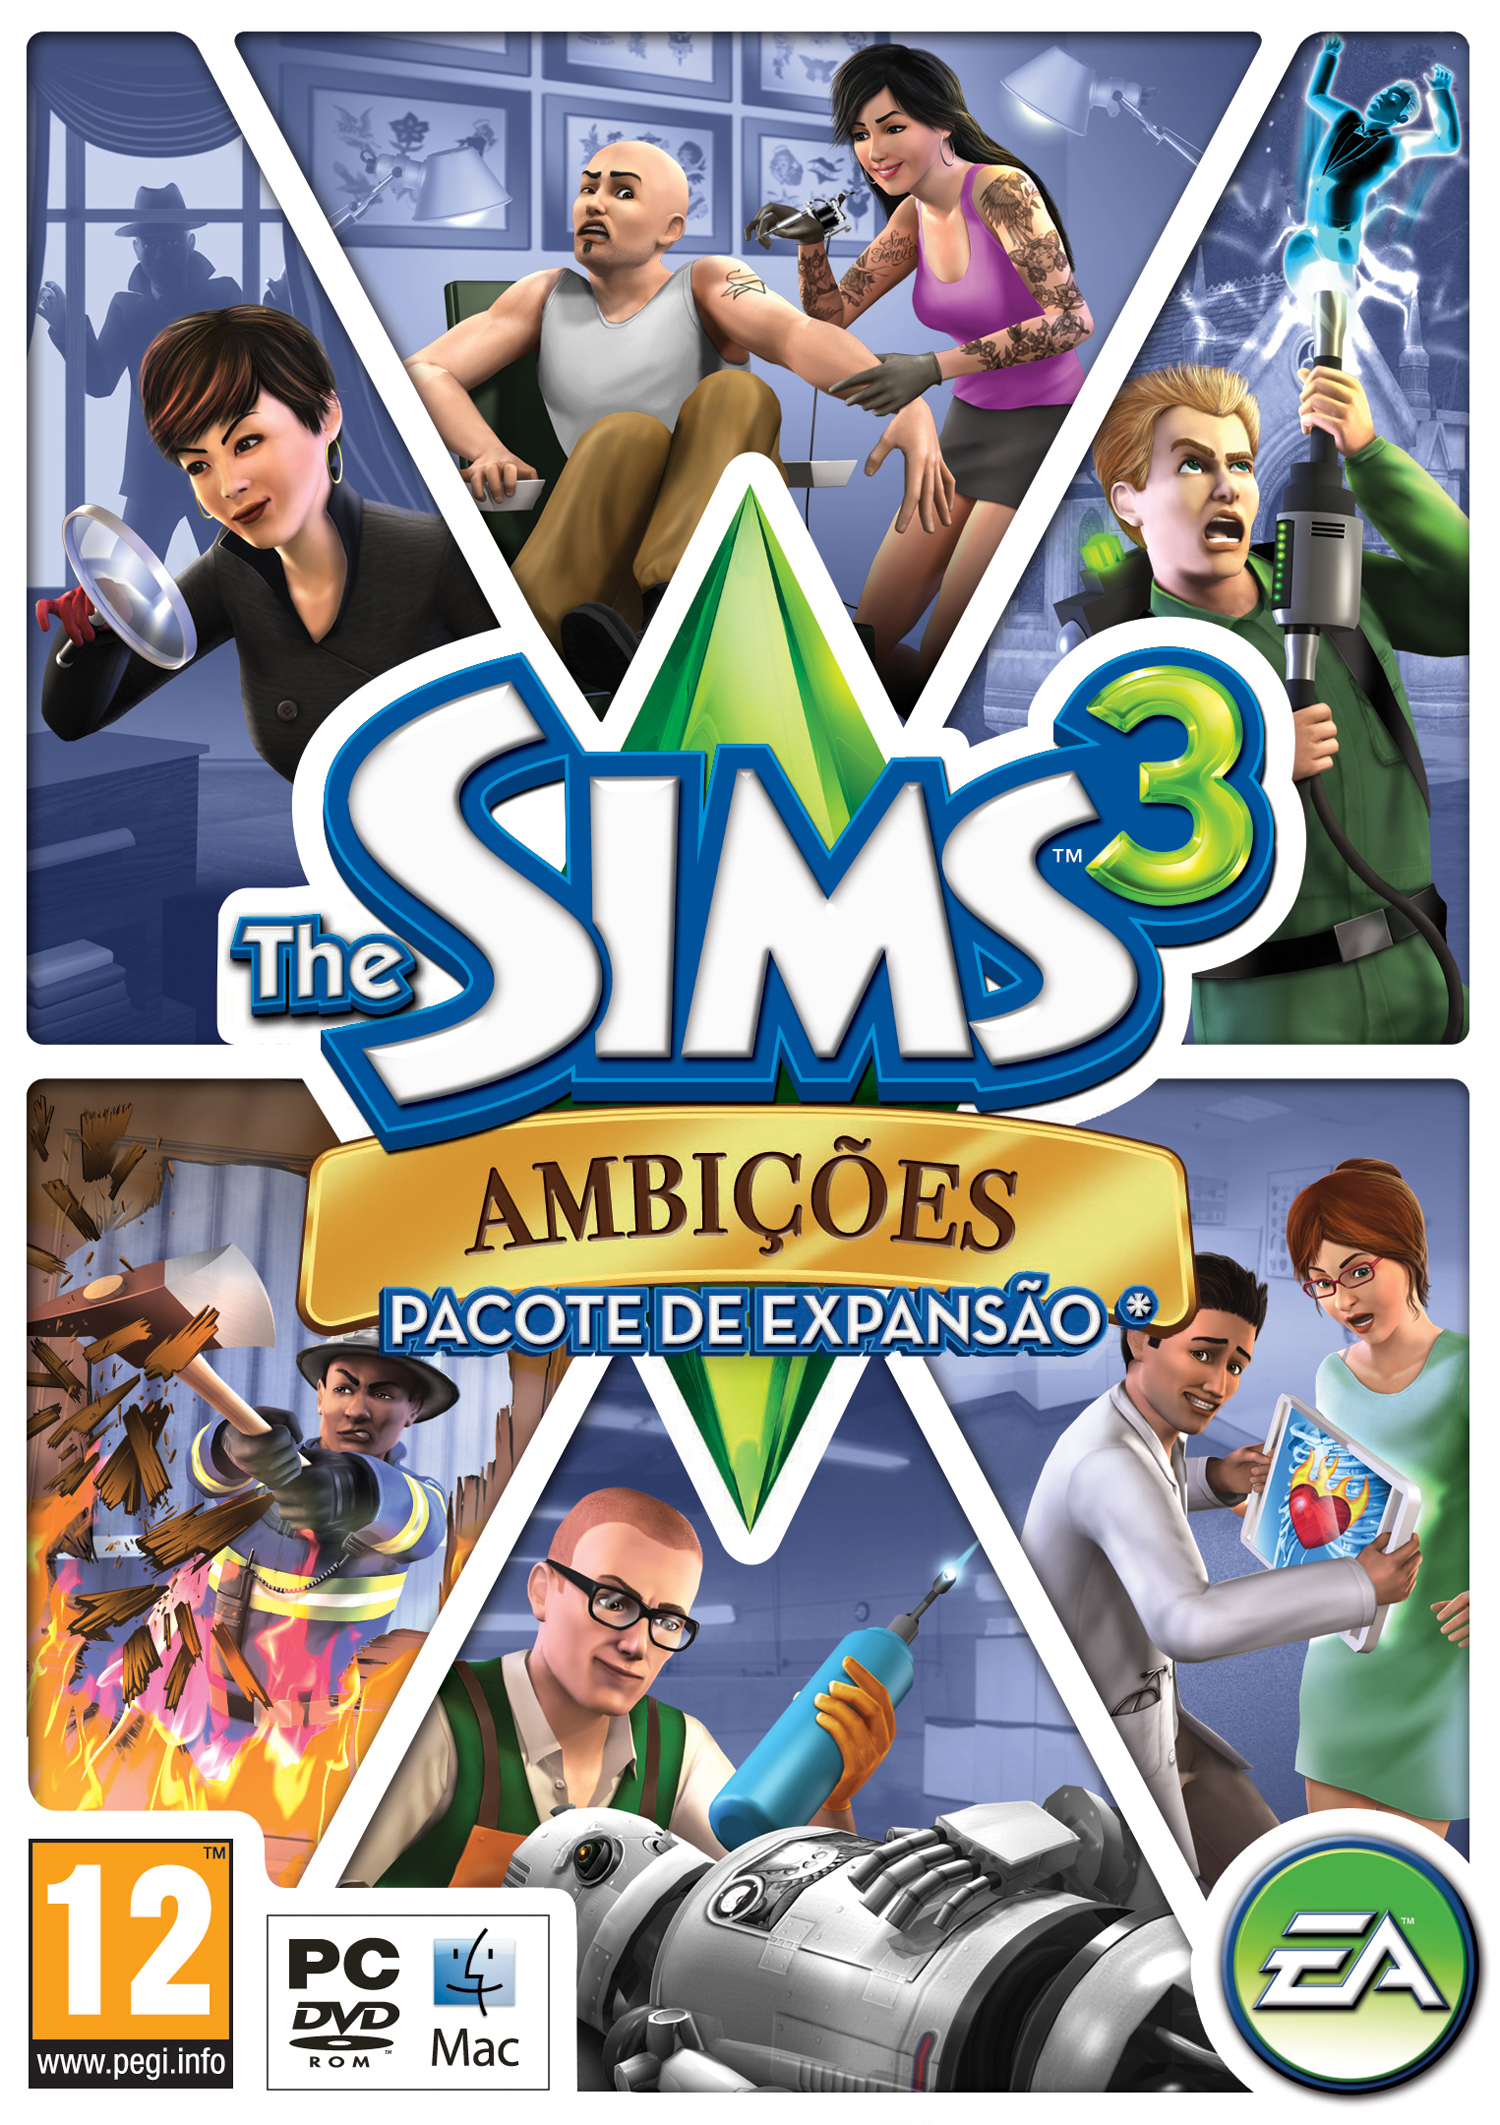 The sims 3 torrent pc